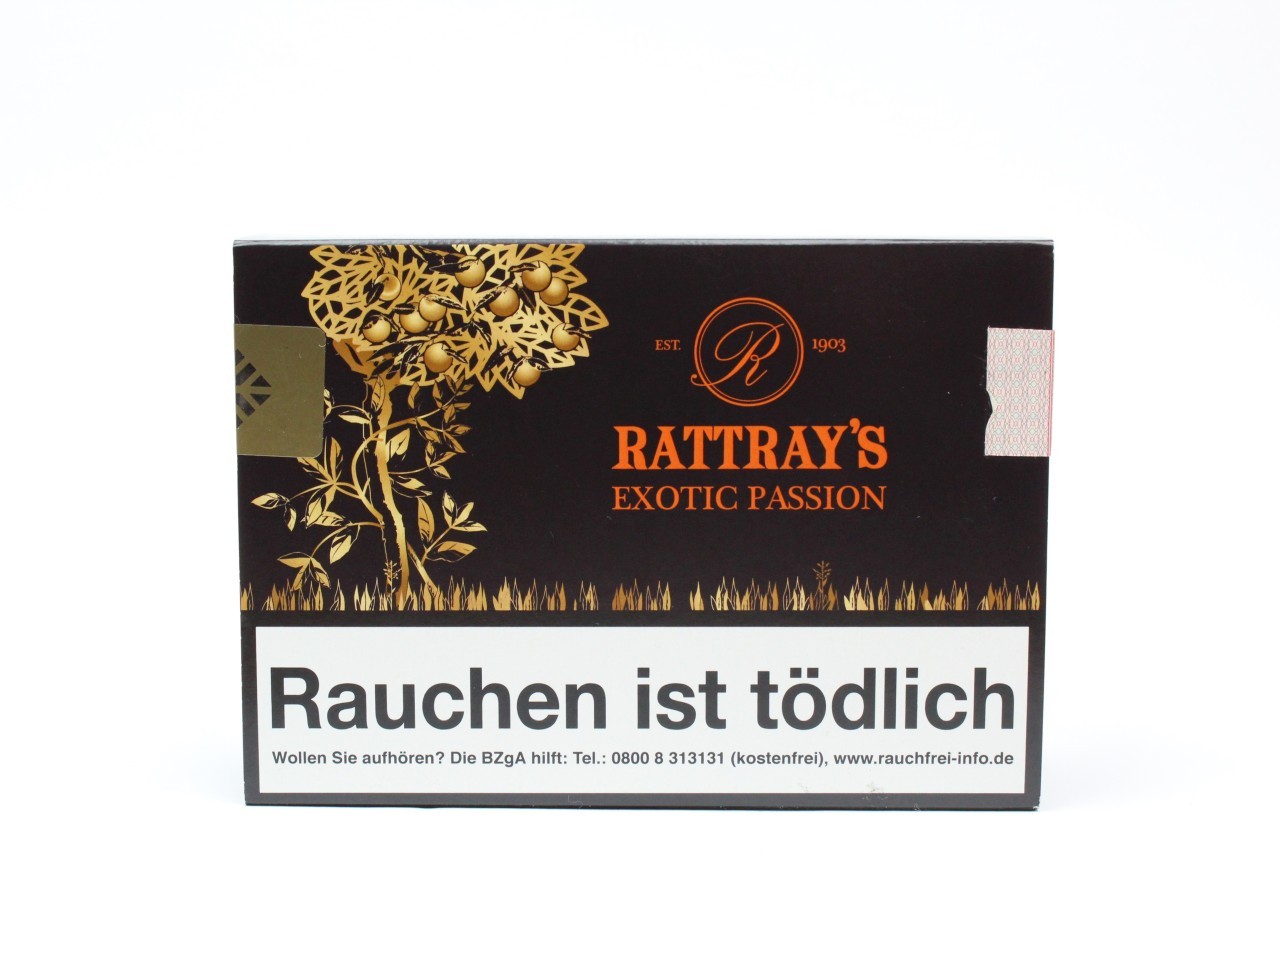 Rattray's Exotic Passion